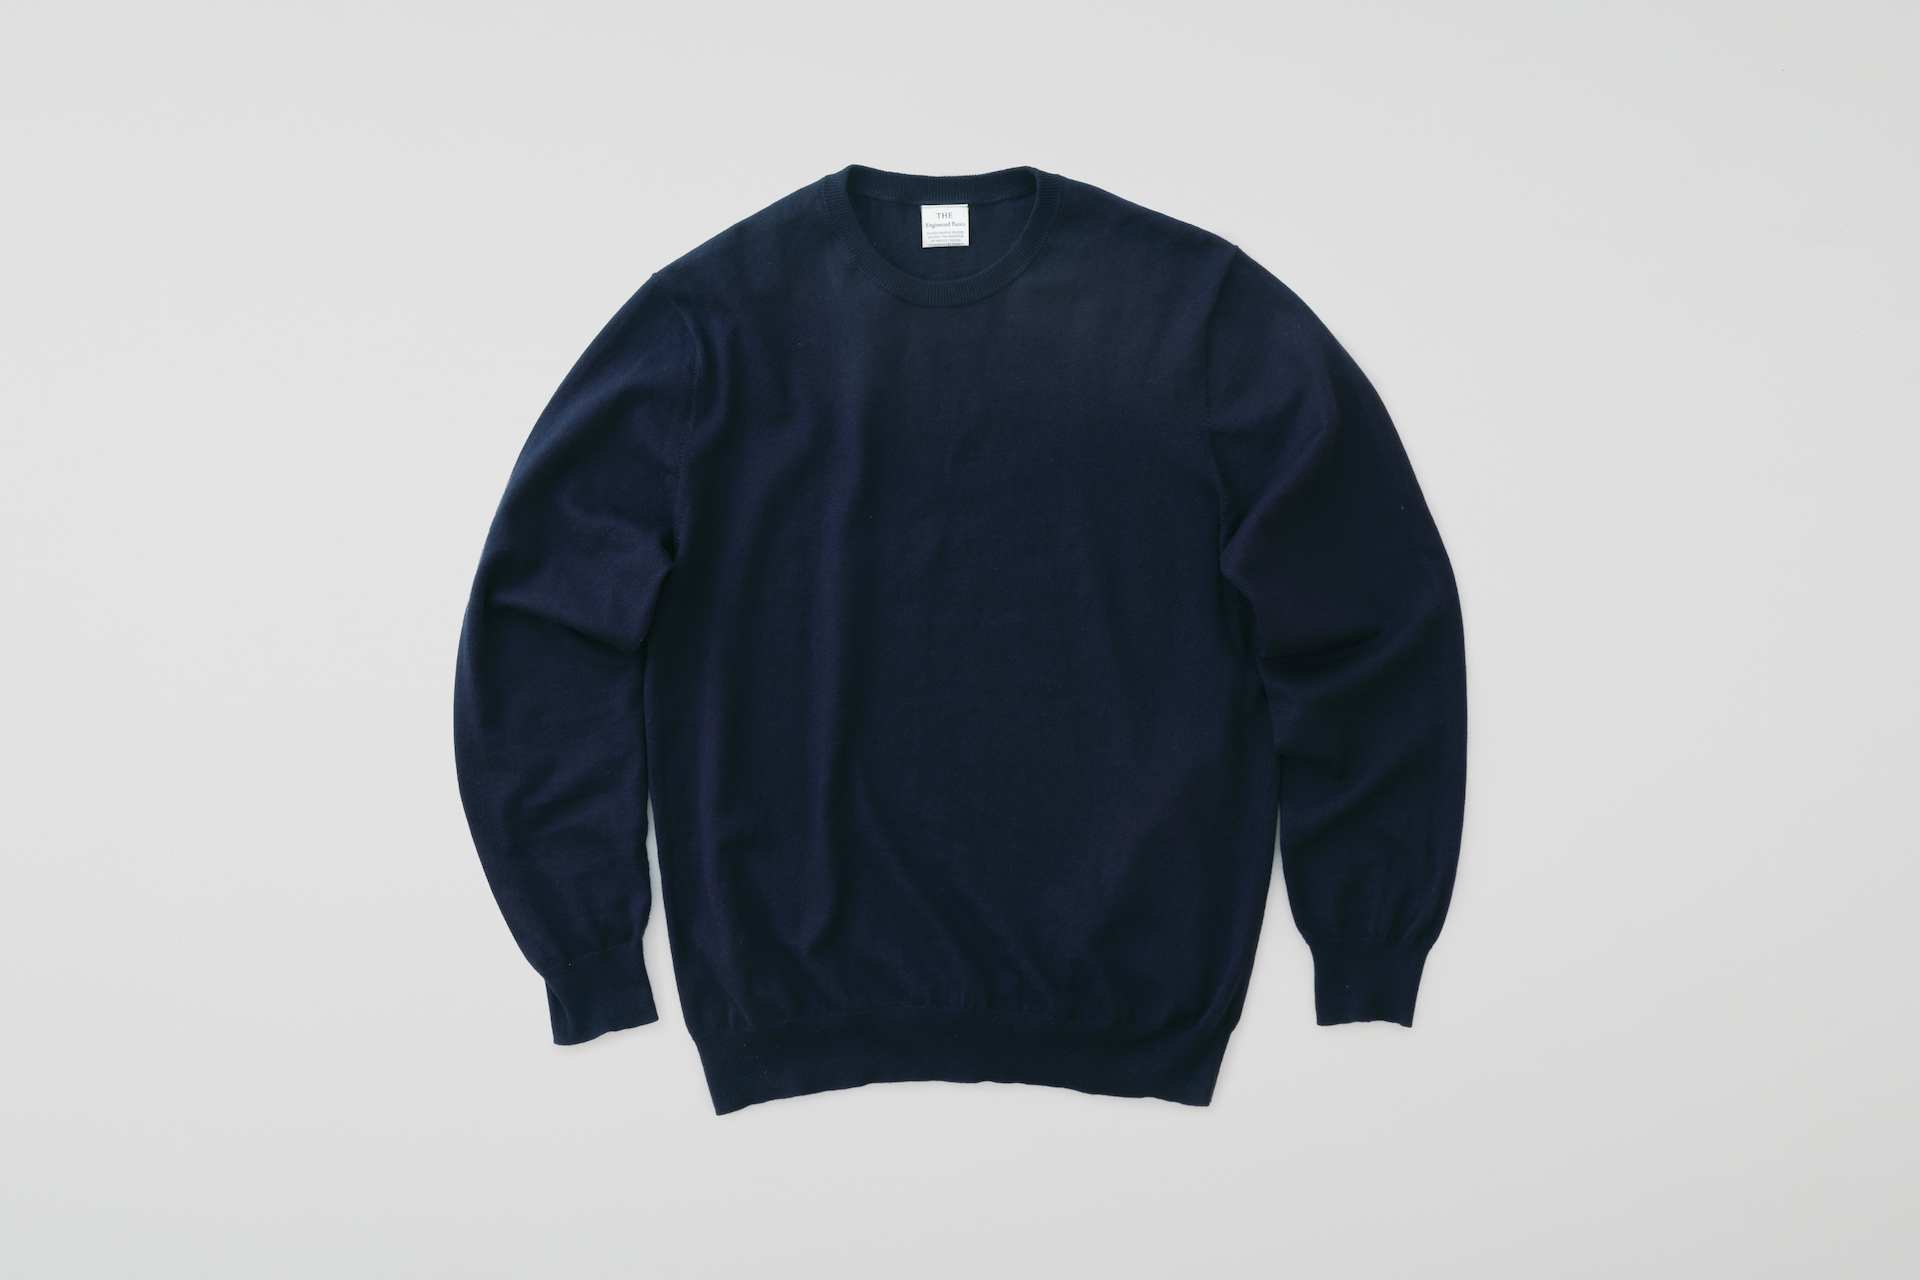 THE Sweater Crew neck / THE Sweater V-neck